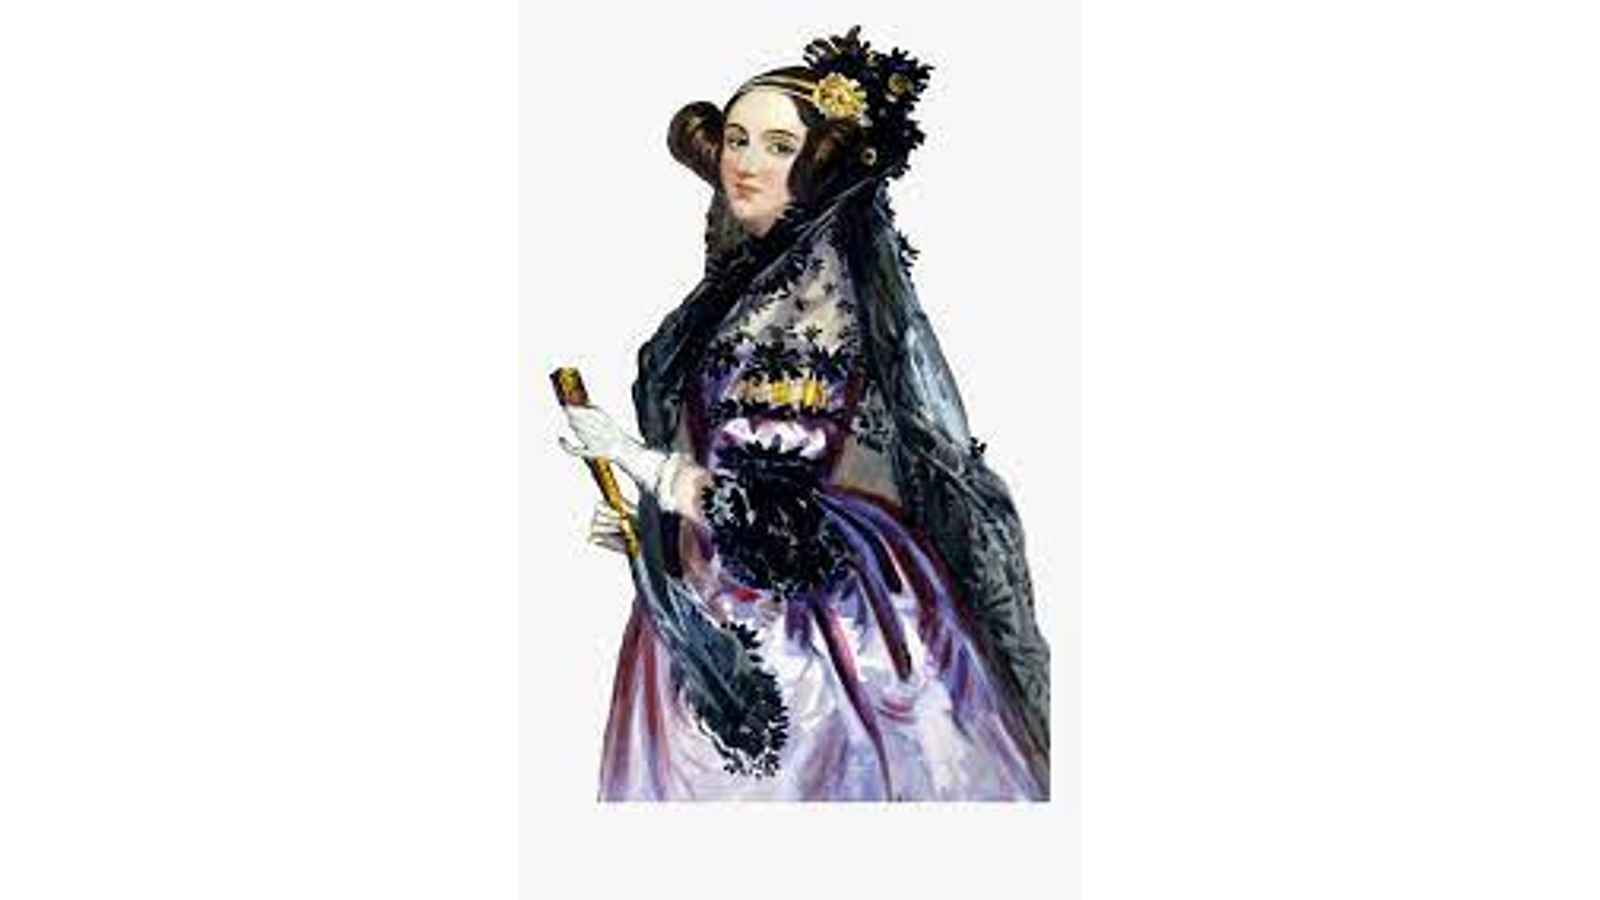 ADA Lovelace Day in U.S. 2023: Date, History, Facts about Early Computers